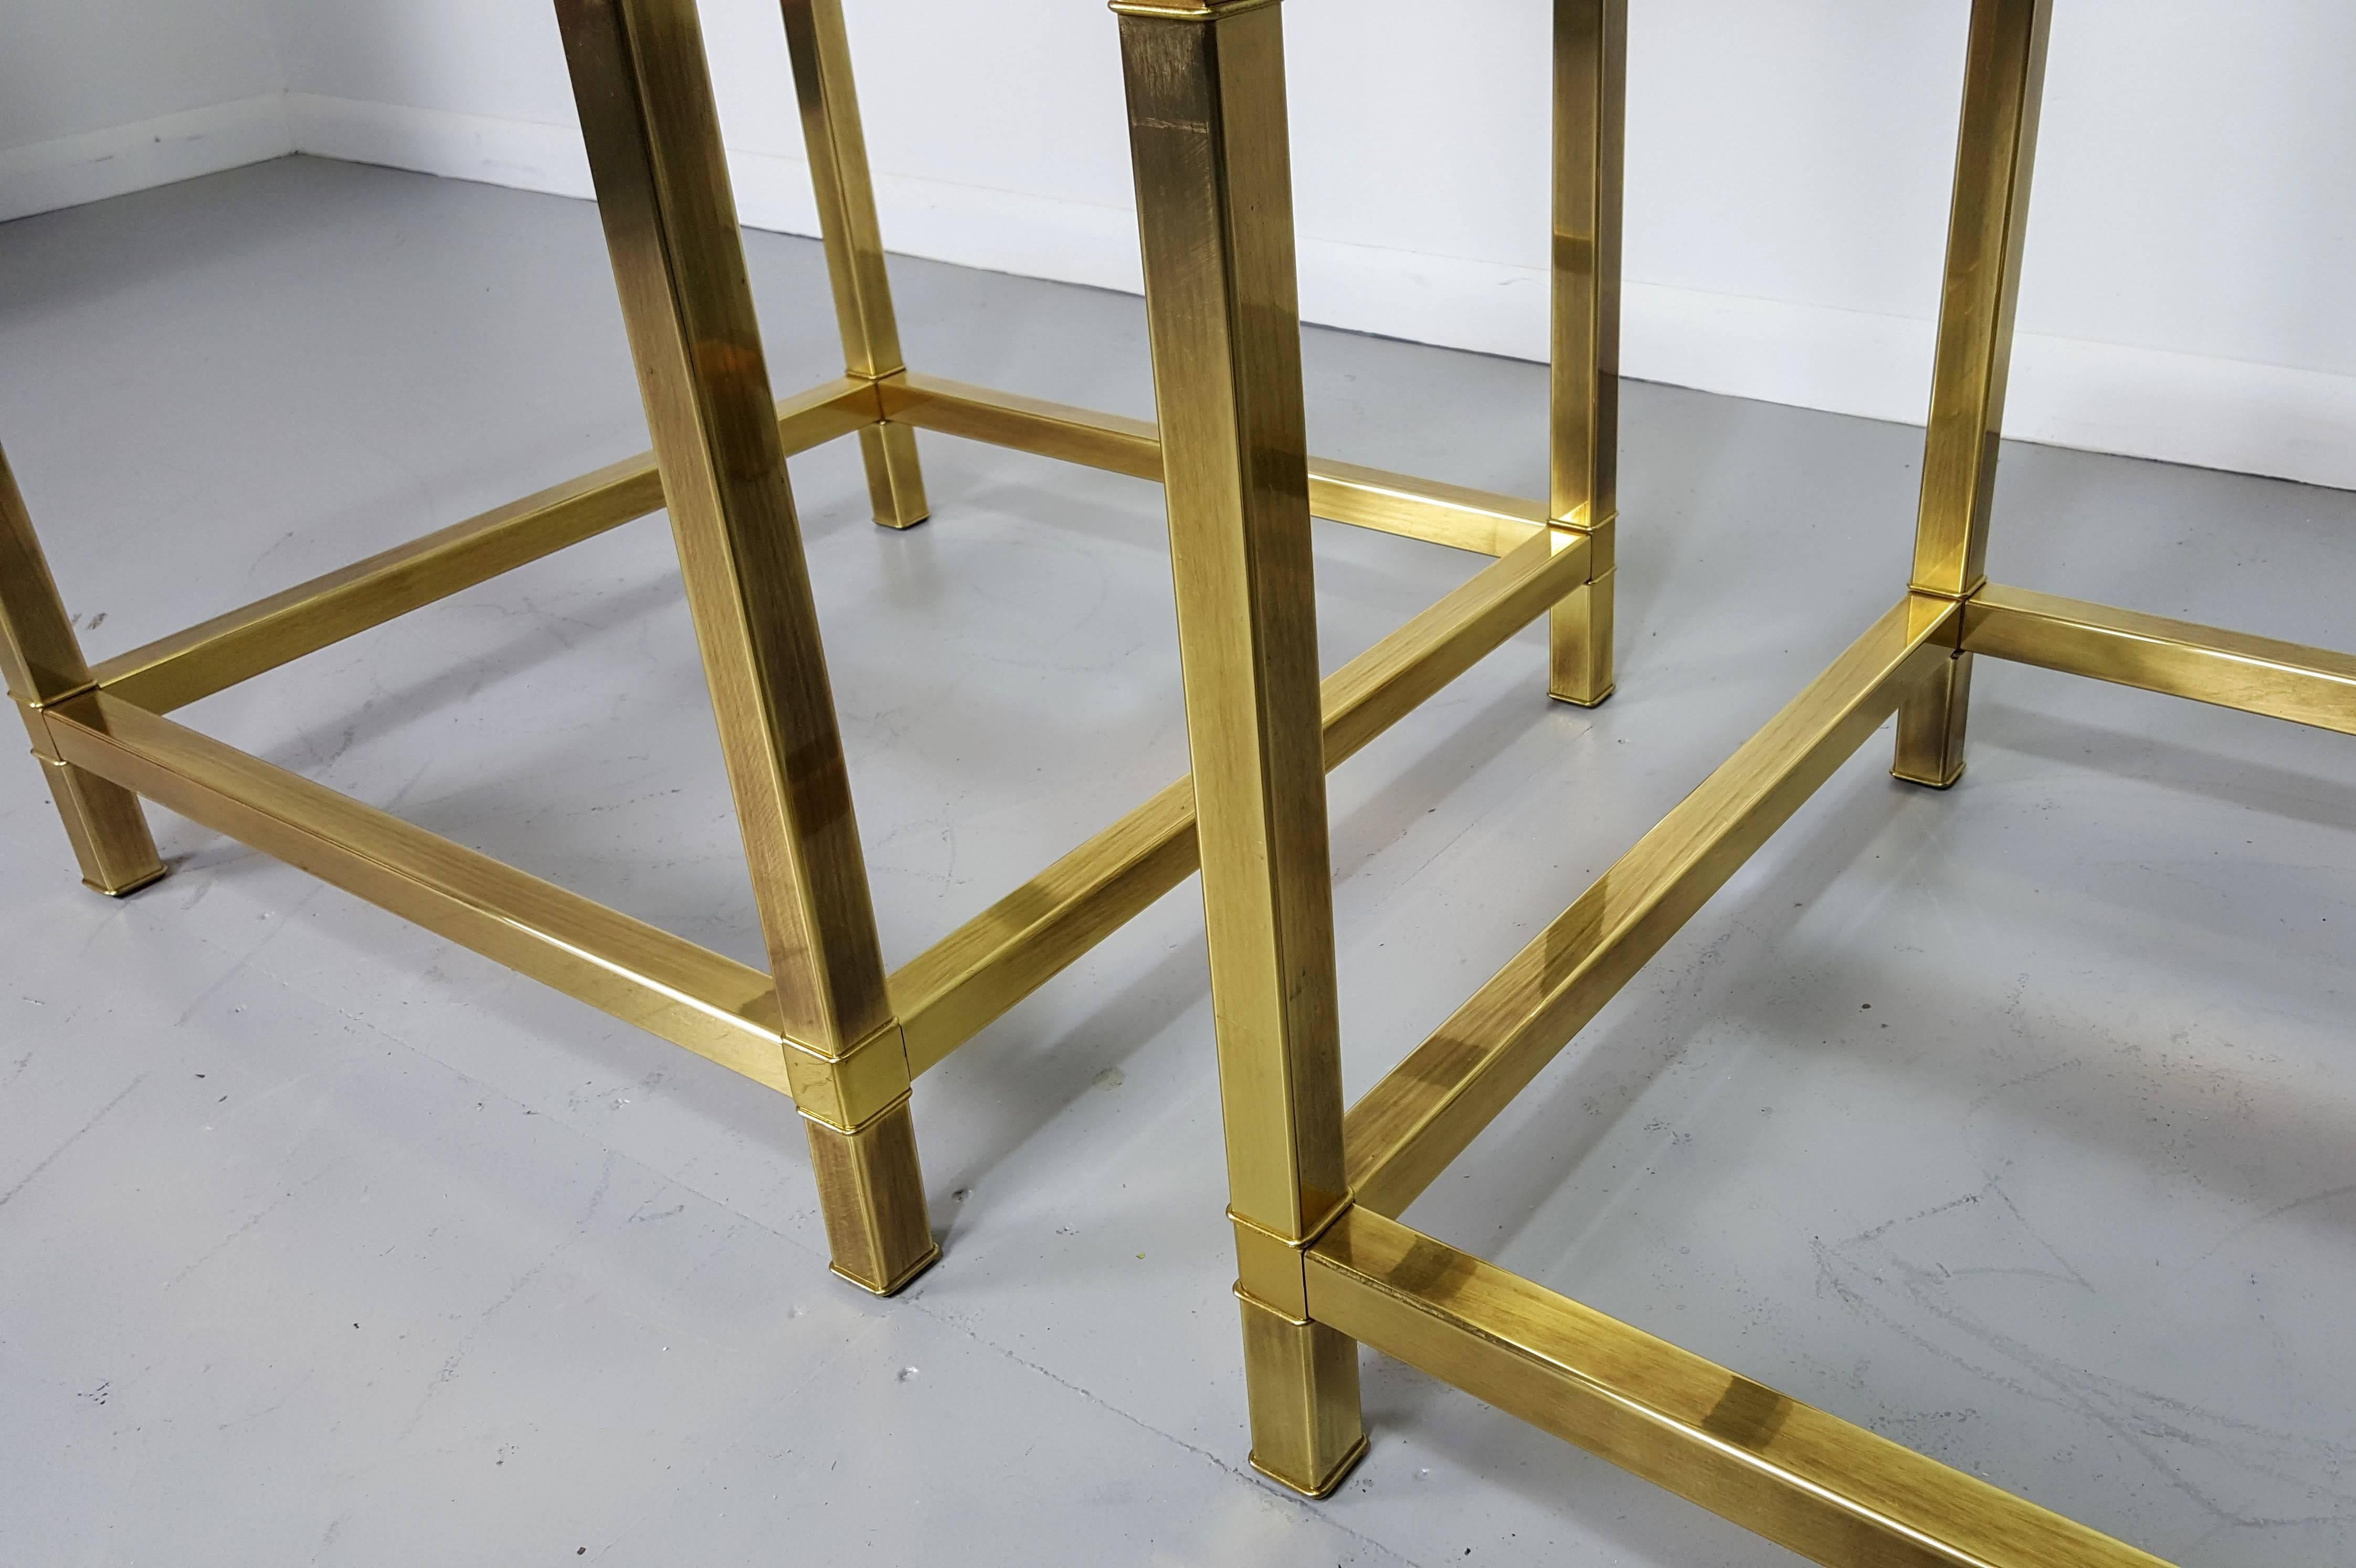 Immaculate pair of large patinated brass end tables by Mastercraft, 1970s. Tables feature rounded 